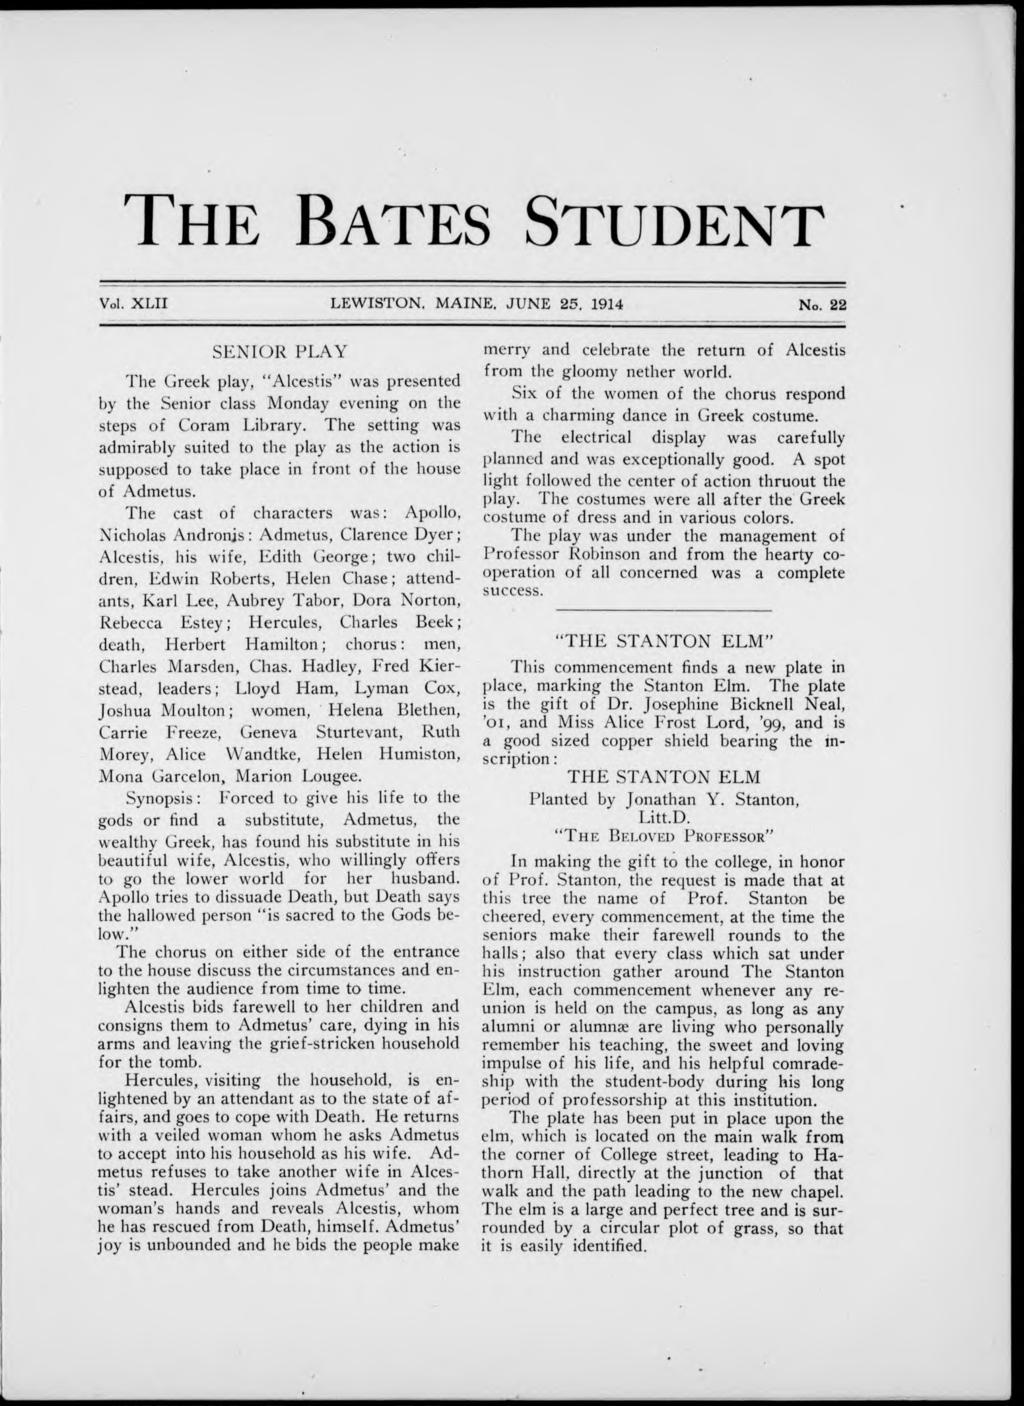 THE BATES STUDENT Vol. XLII LEWISTON. MAINE. JUNE 25. 1914 No. 22 SENIOR PLAY The Greek play, "Alcestis" was presented by the Senior class Monday evening on the steps of Coram Library.